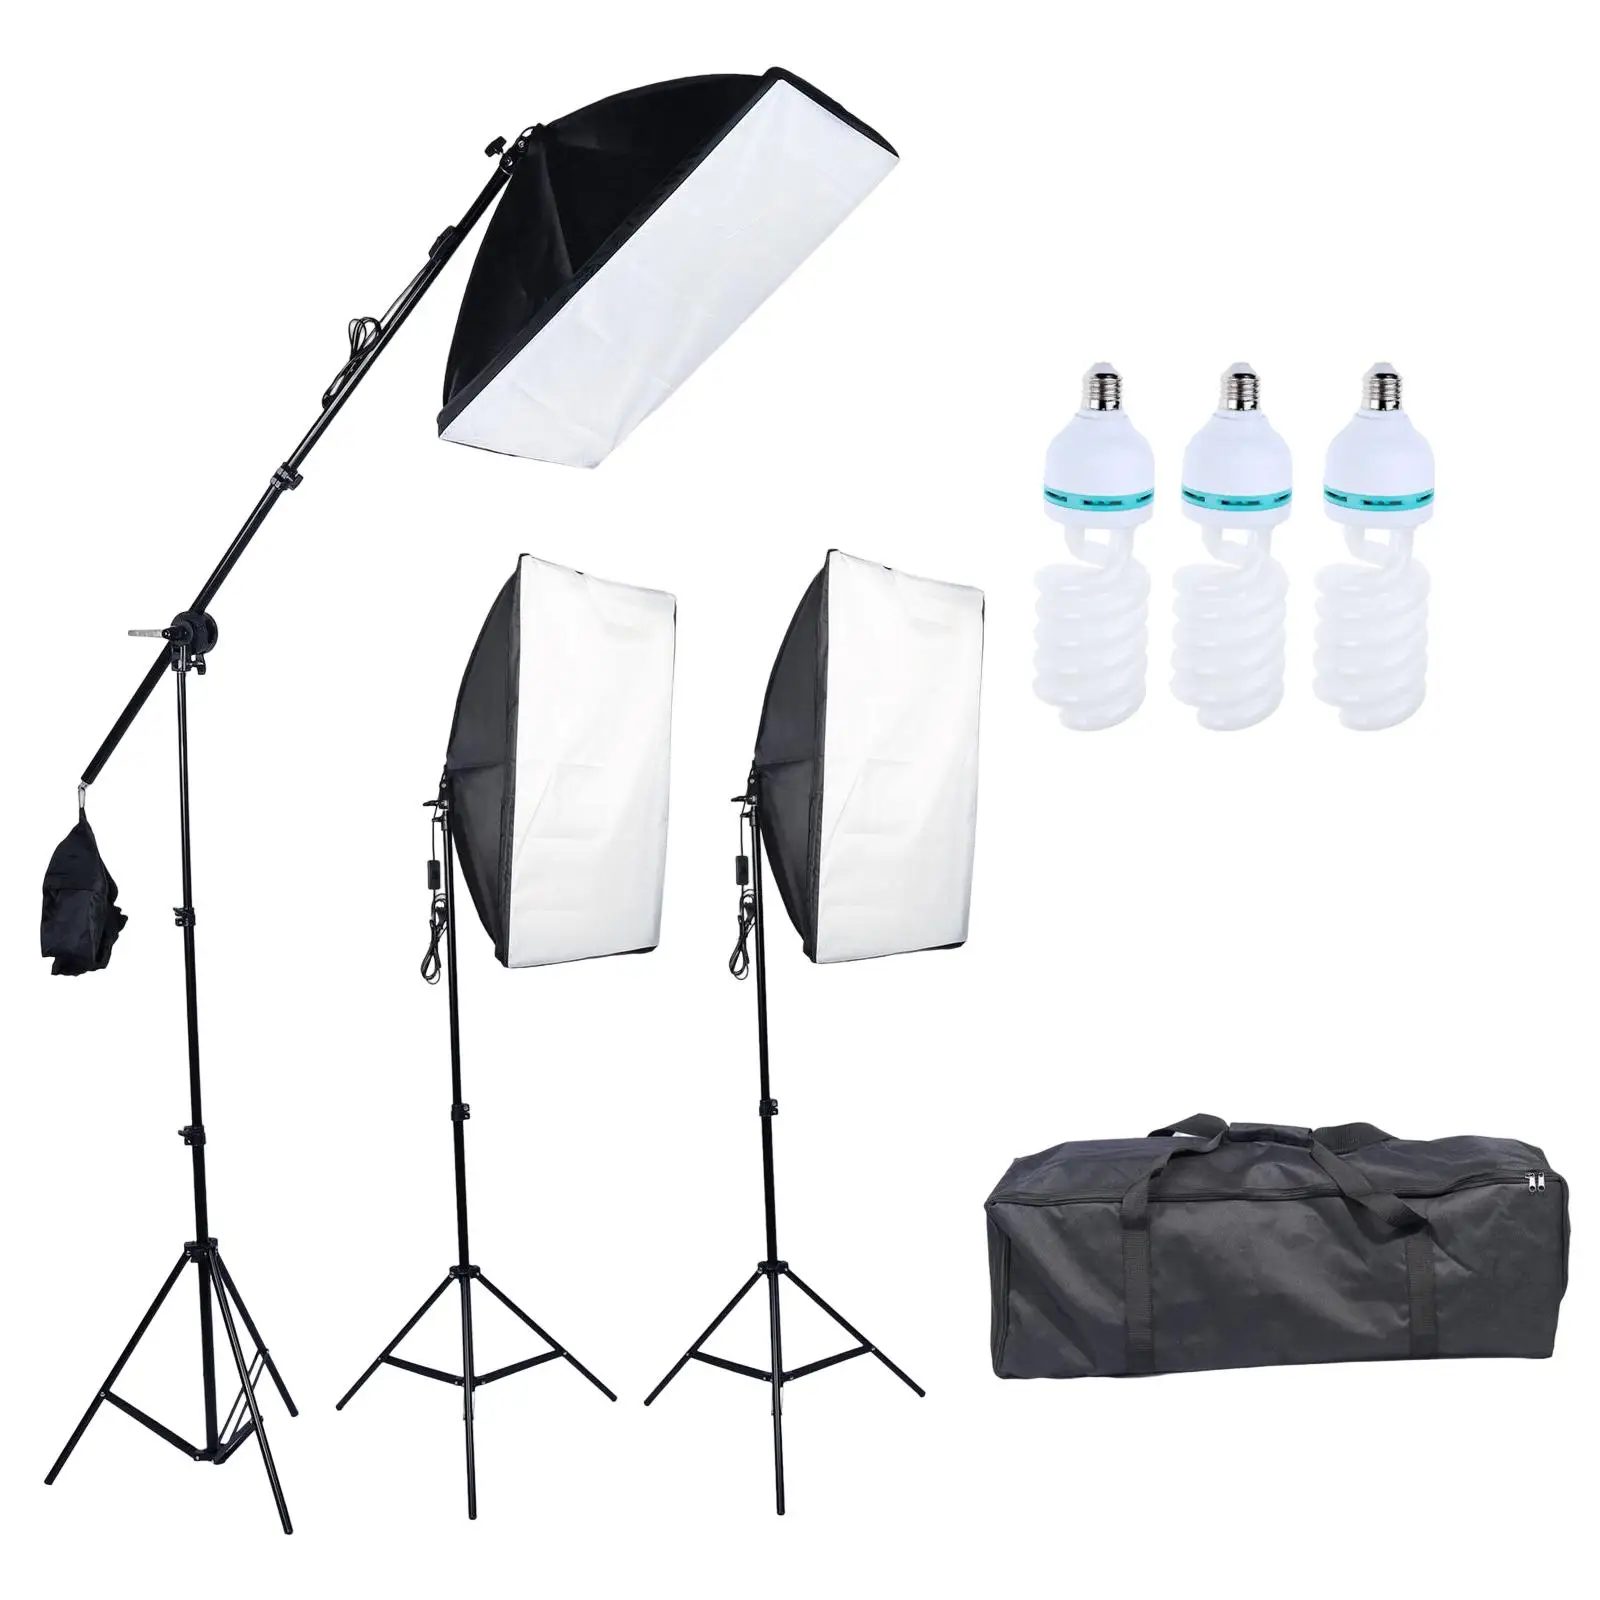 14 Pieces Professional Photography Lighting Kit Cross Arm 50Cmx70cm Softbox with Carrying Case Softbox Lighting Kit for Portrait